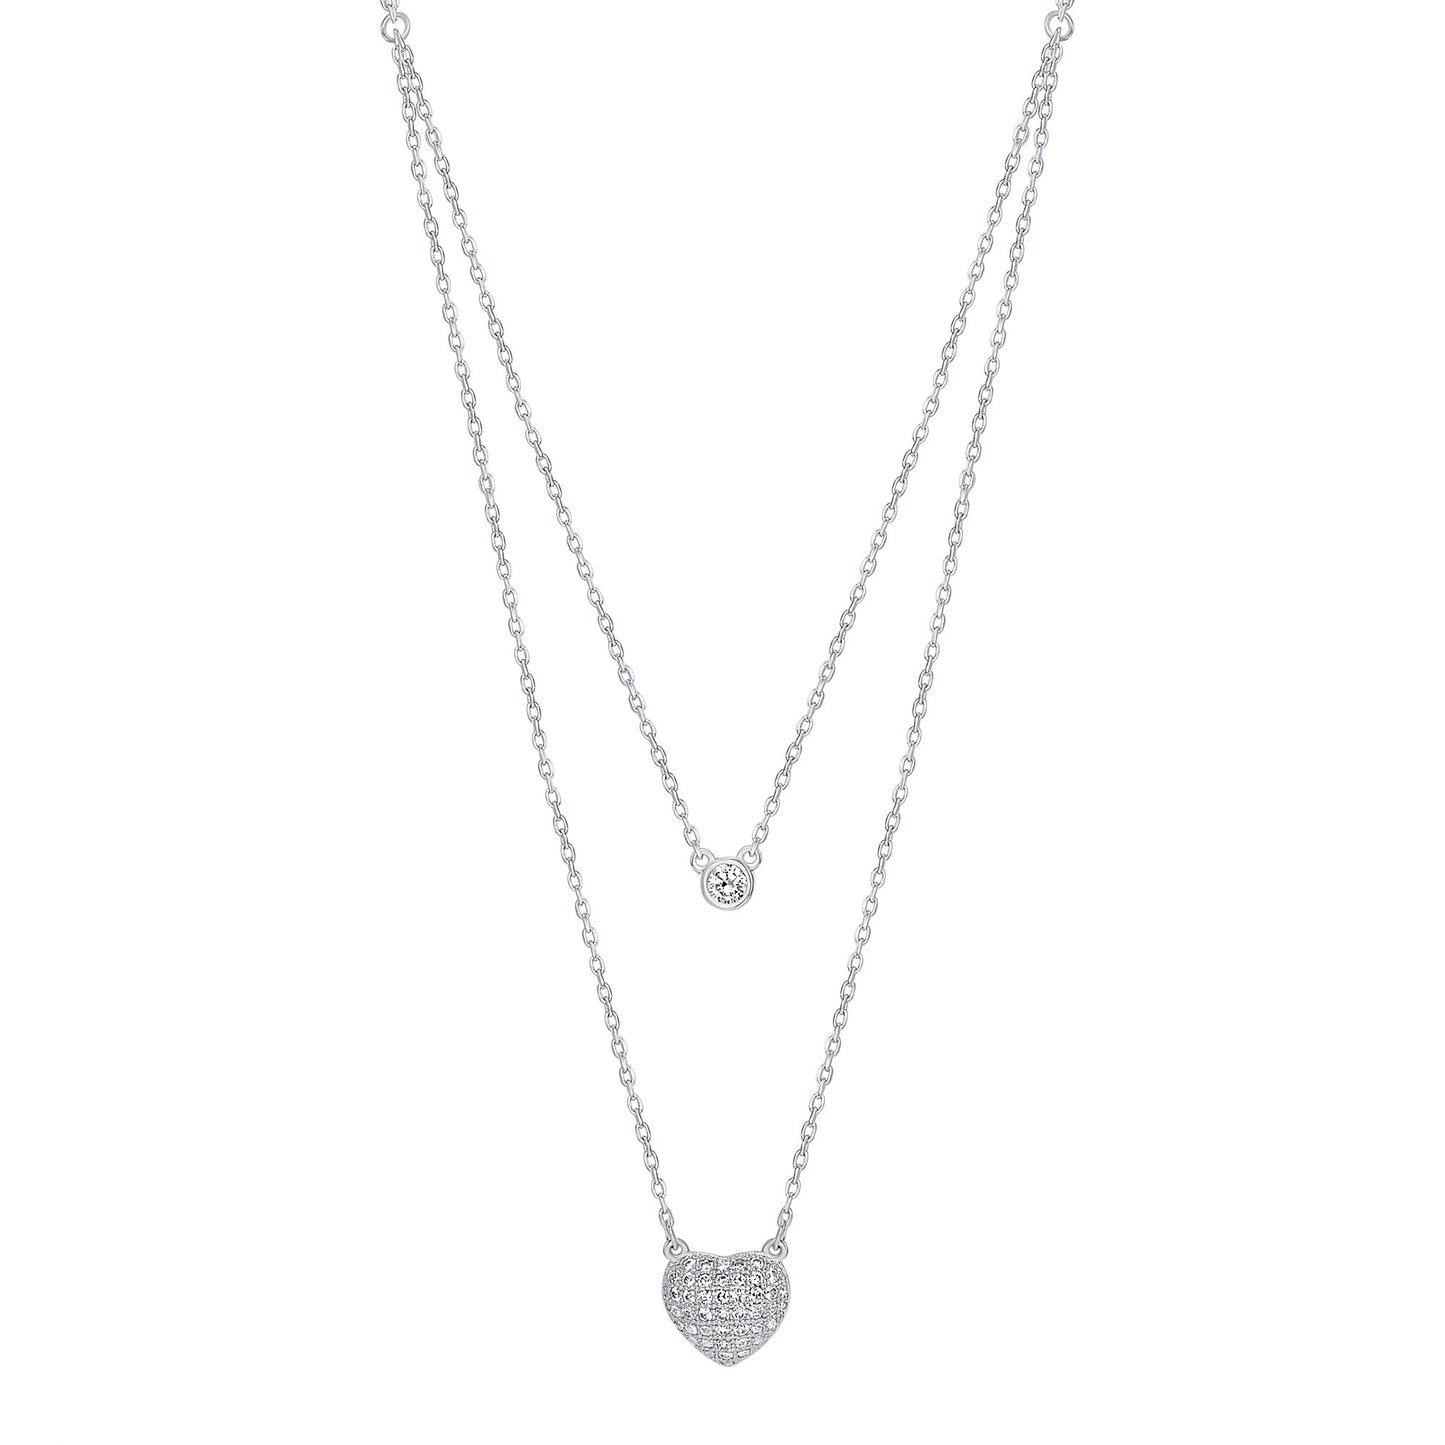 Silver 925 Rhodium Plated One Row Bezel & 1 Row Micro Pave Heart Necklace. DGN0989RHD